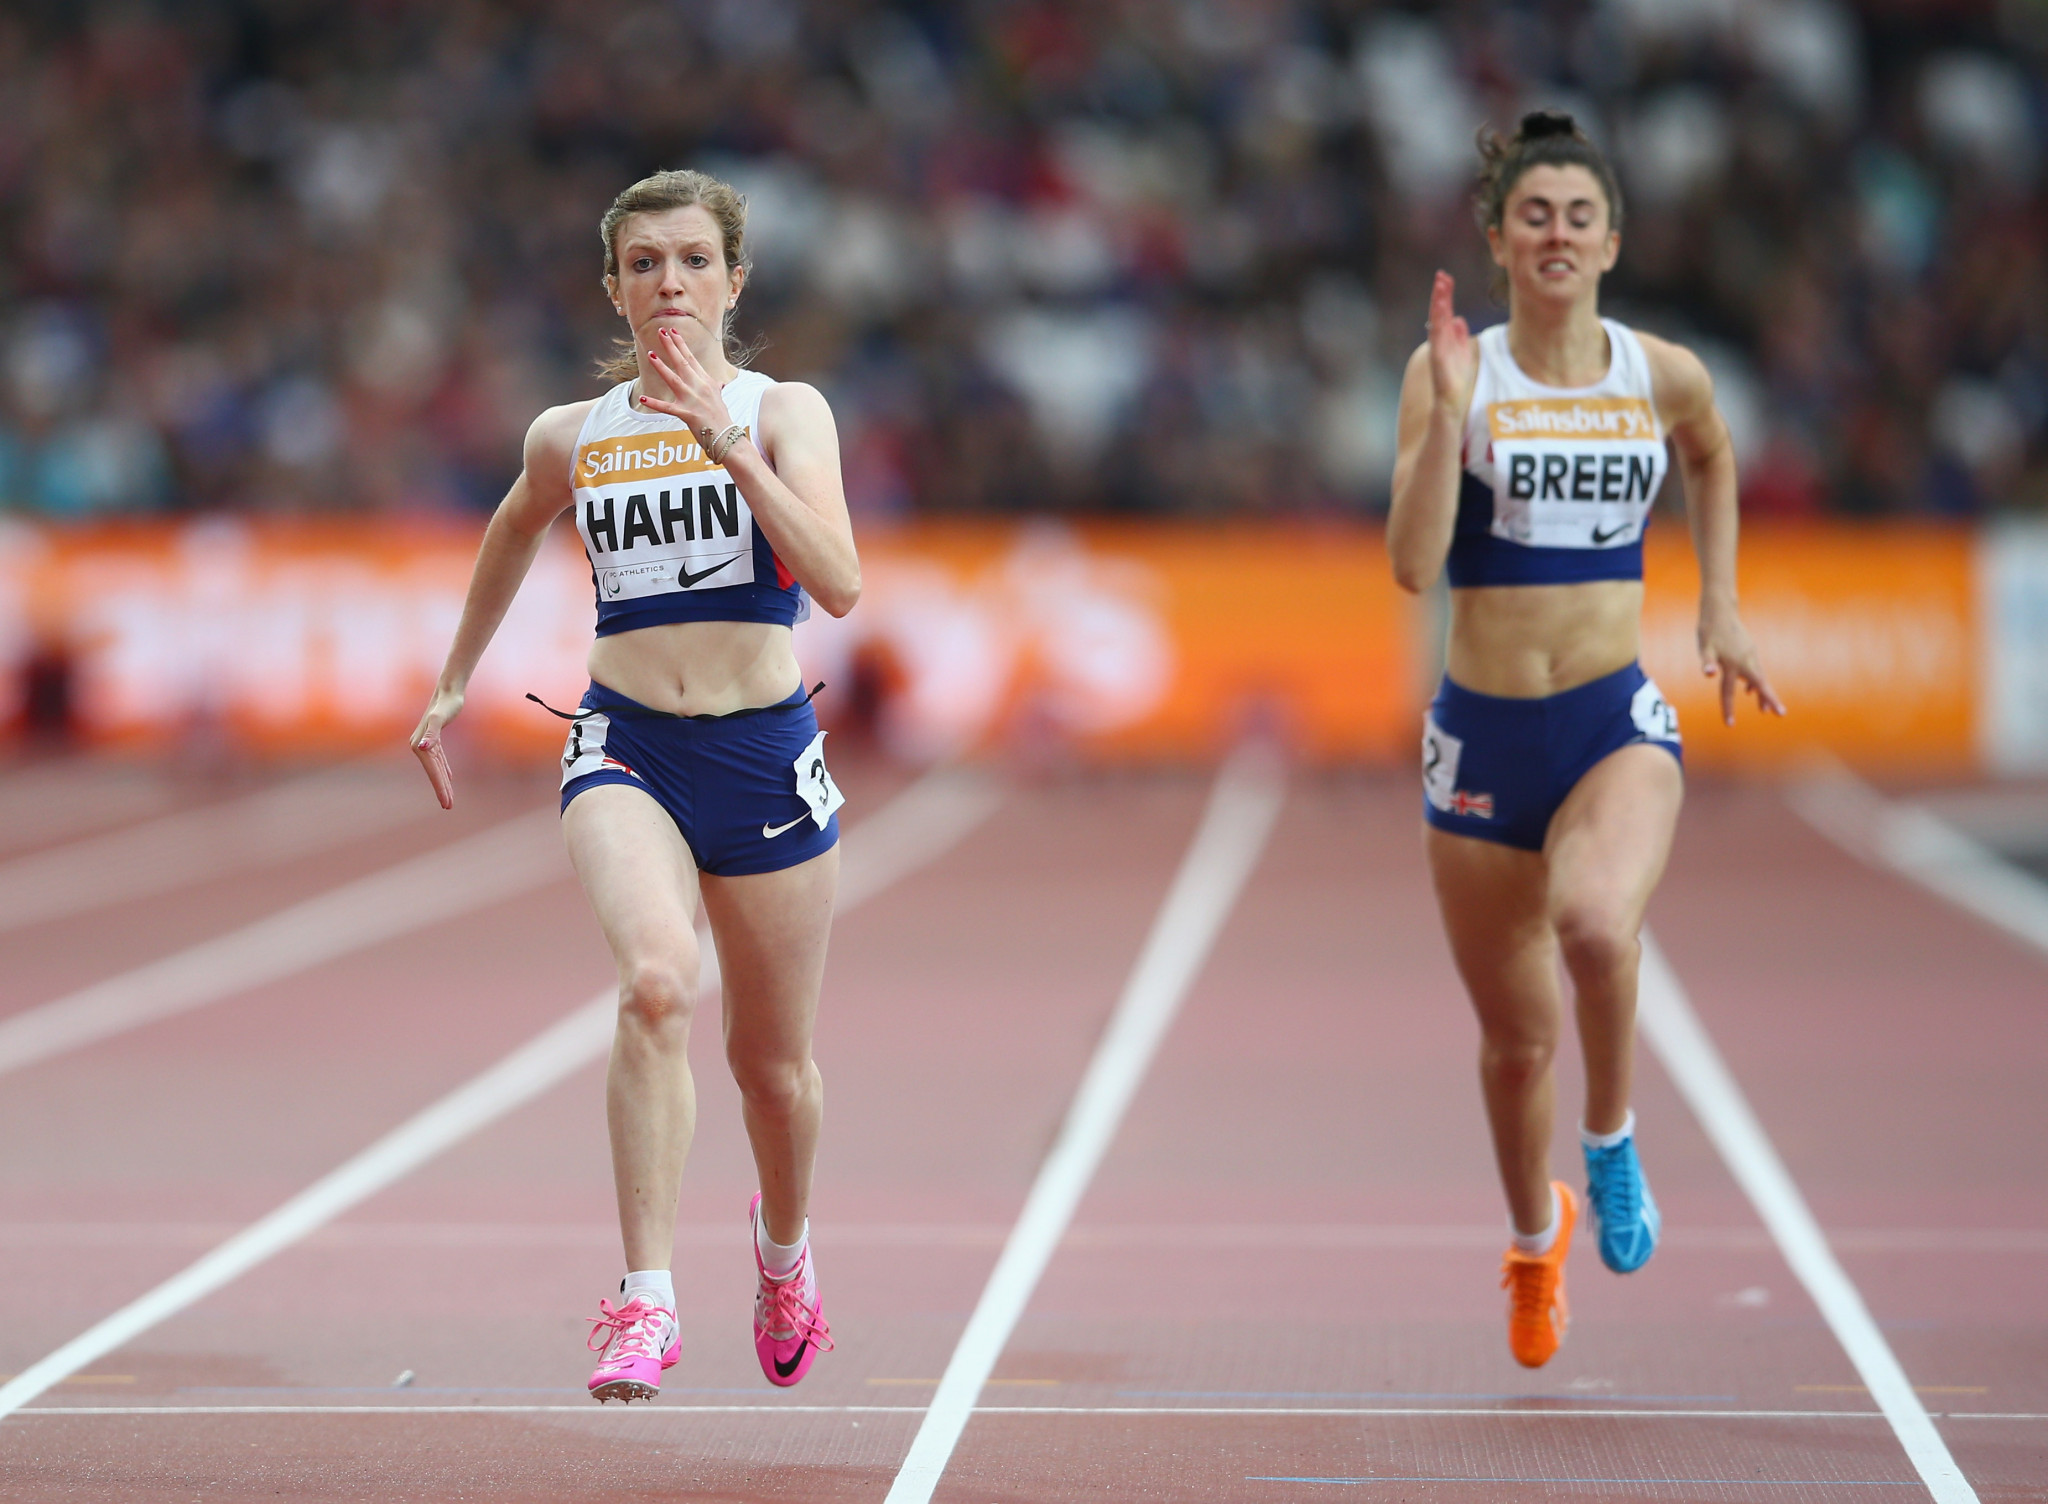 Olivia Breen, right, has also been chosen to represent Wales at Gold Coast 2018 ©Getty Images